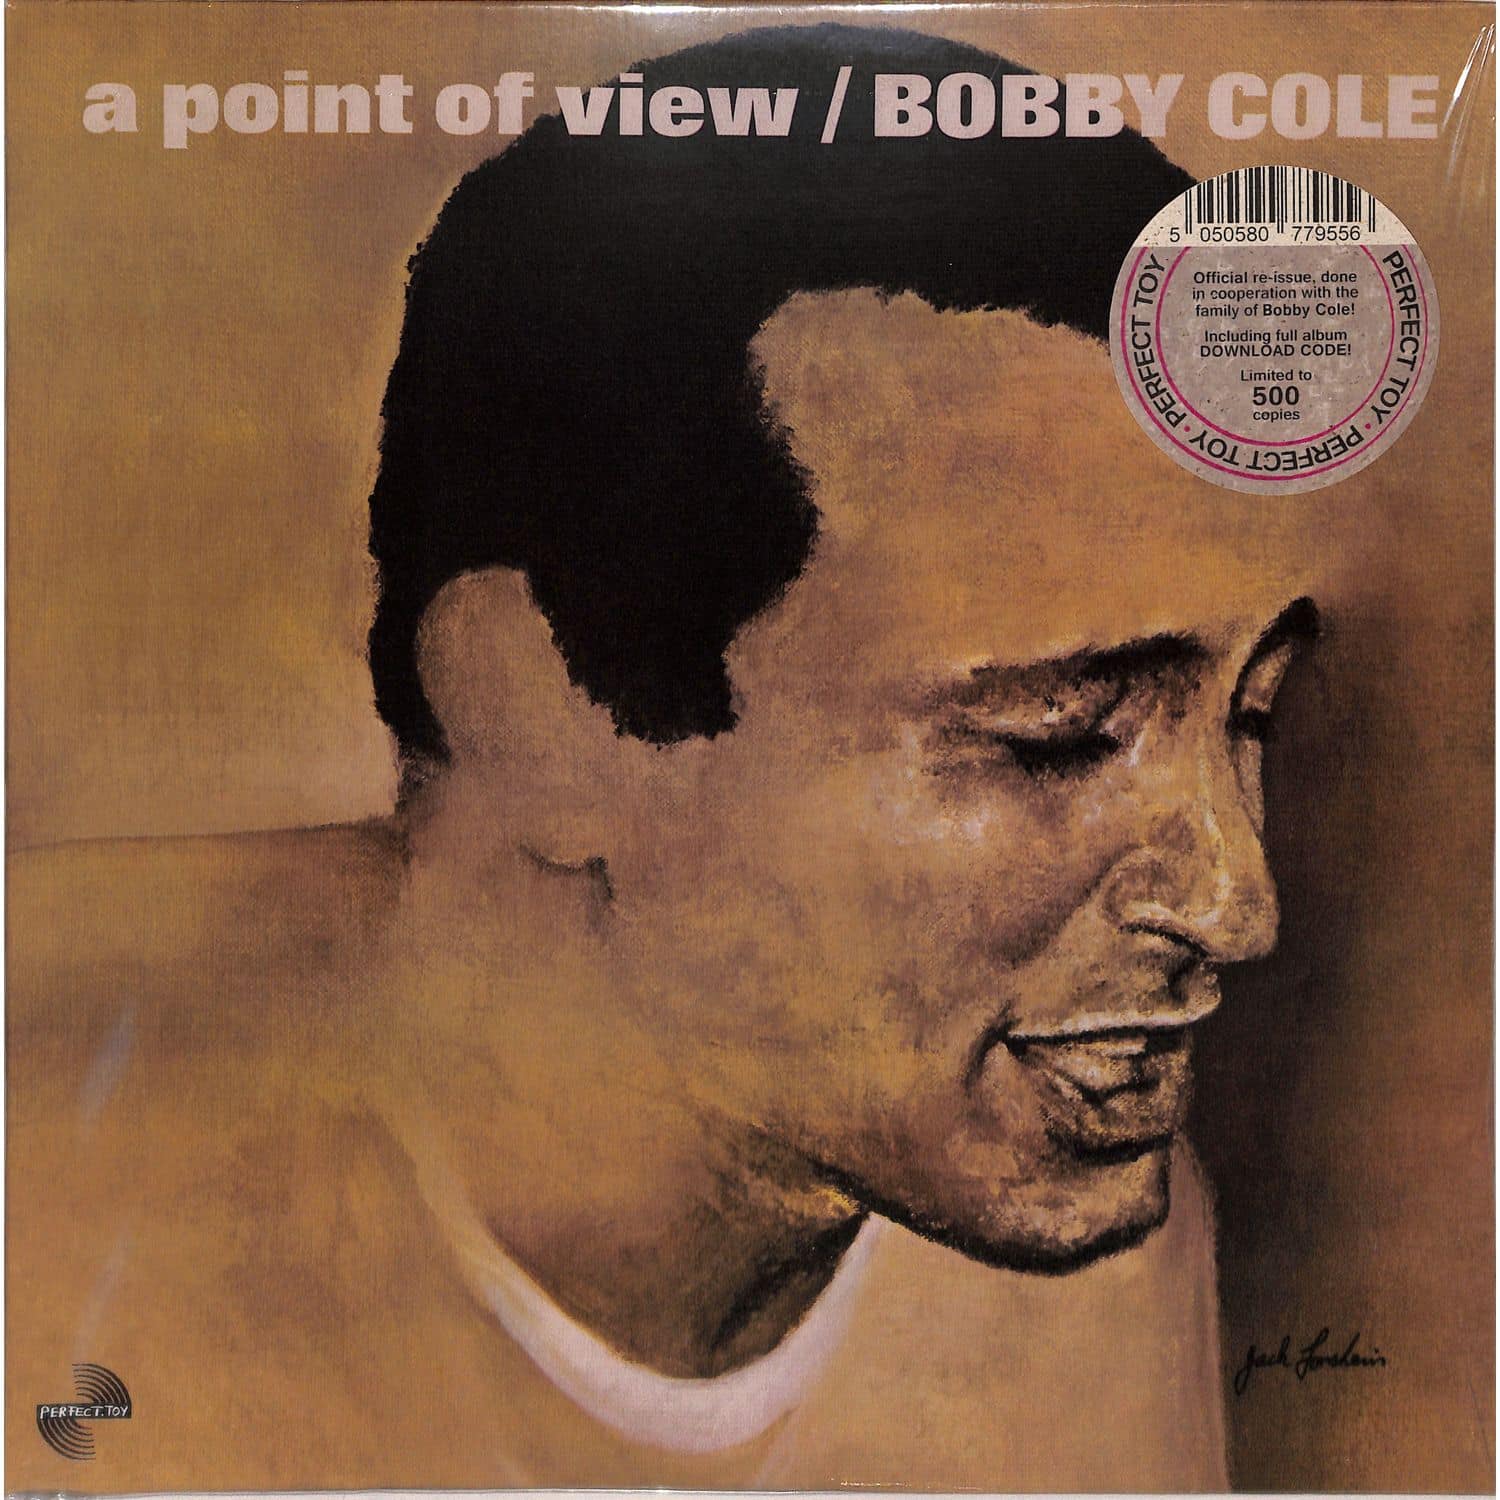 Bobby Cole - A POINT OF VIEW 